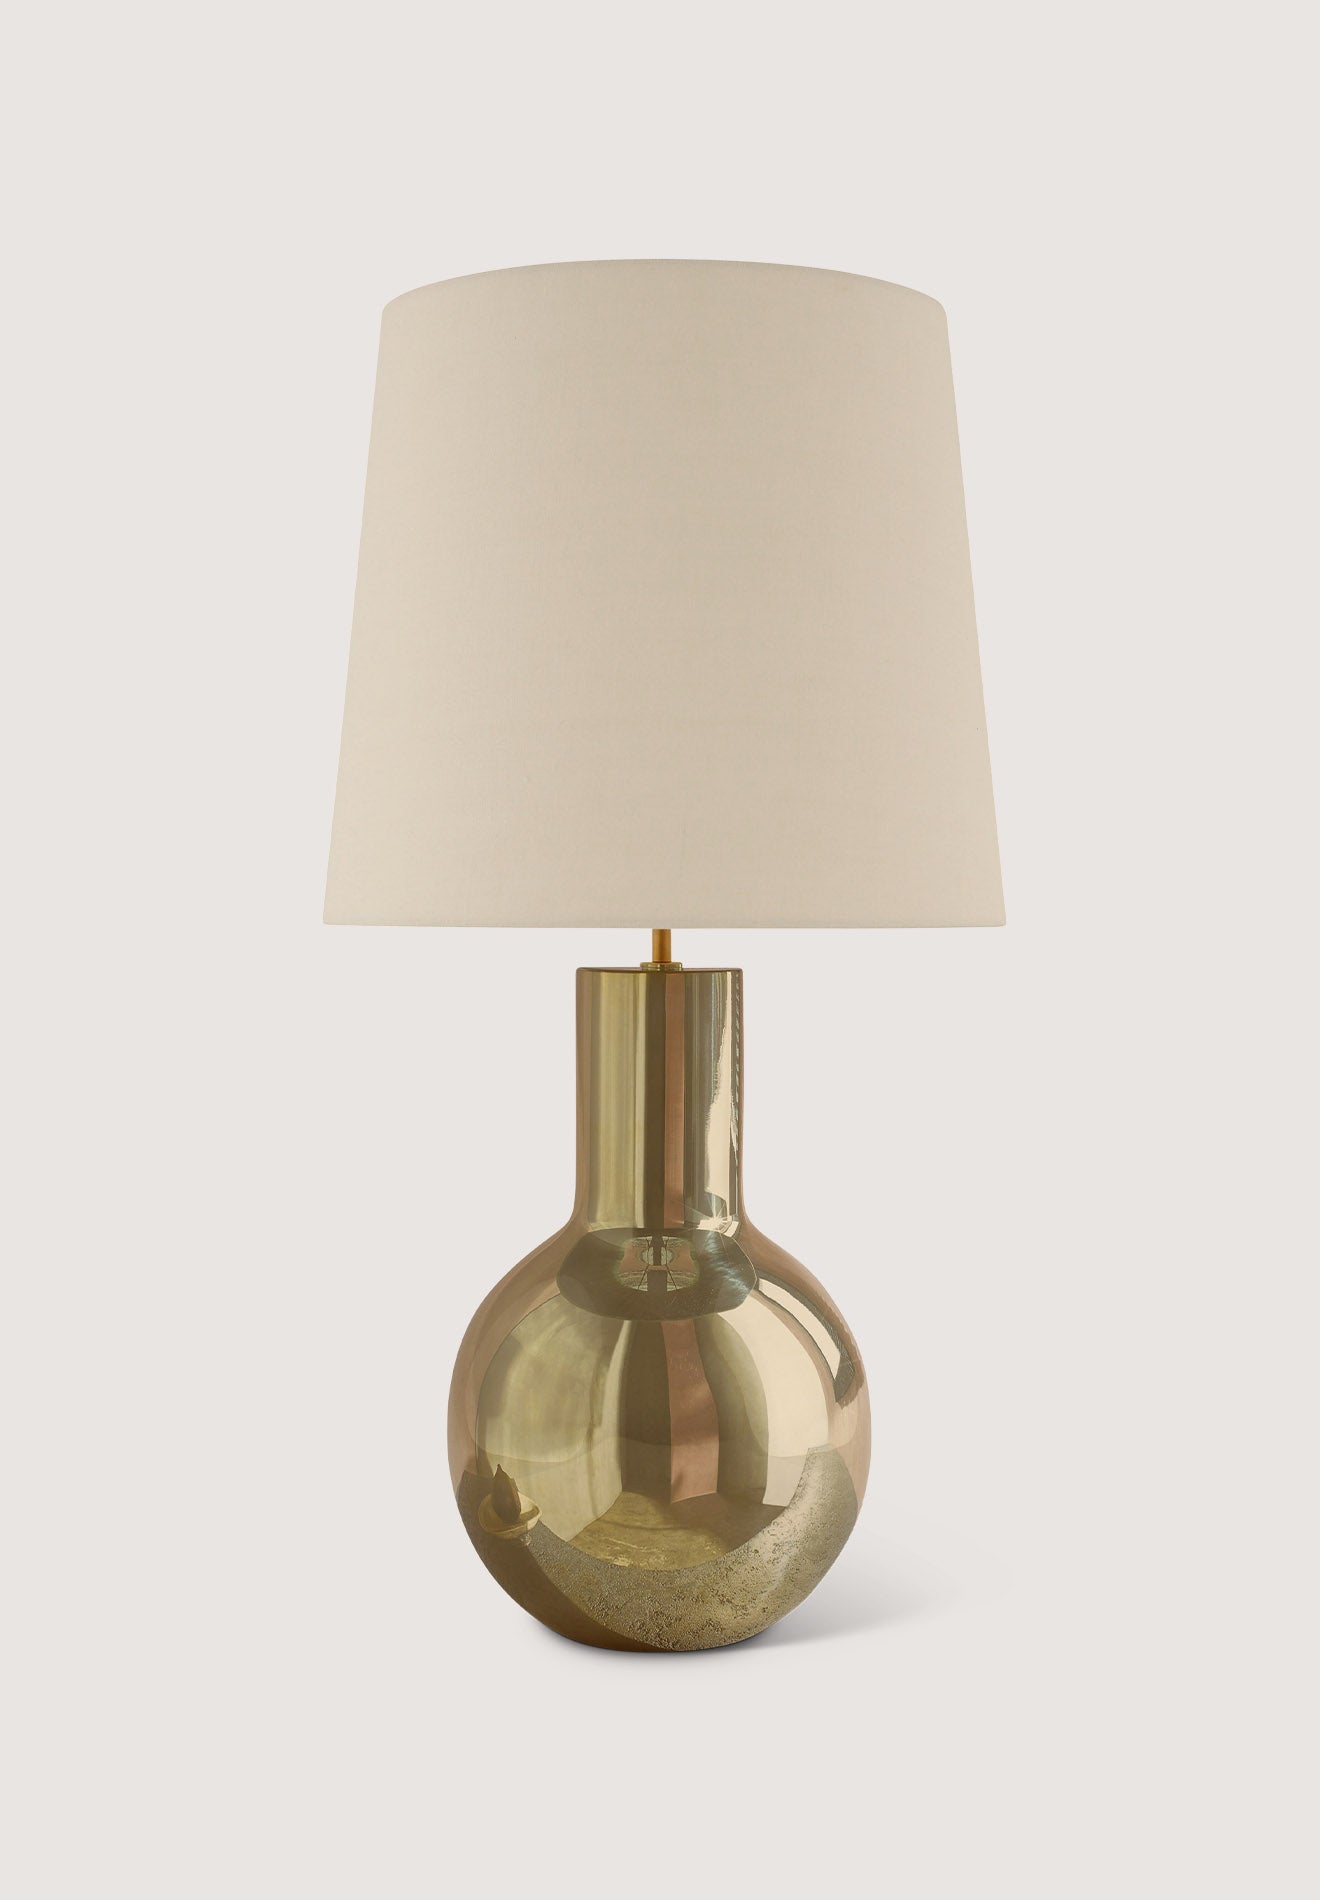 Polished Brass with 18" Bongo Chalk Linen with Cream Card lining